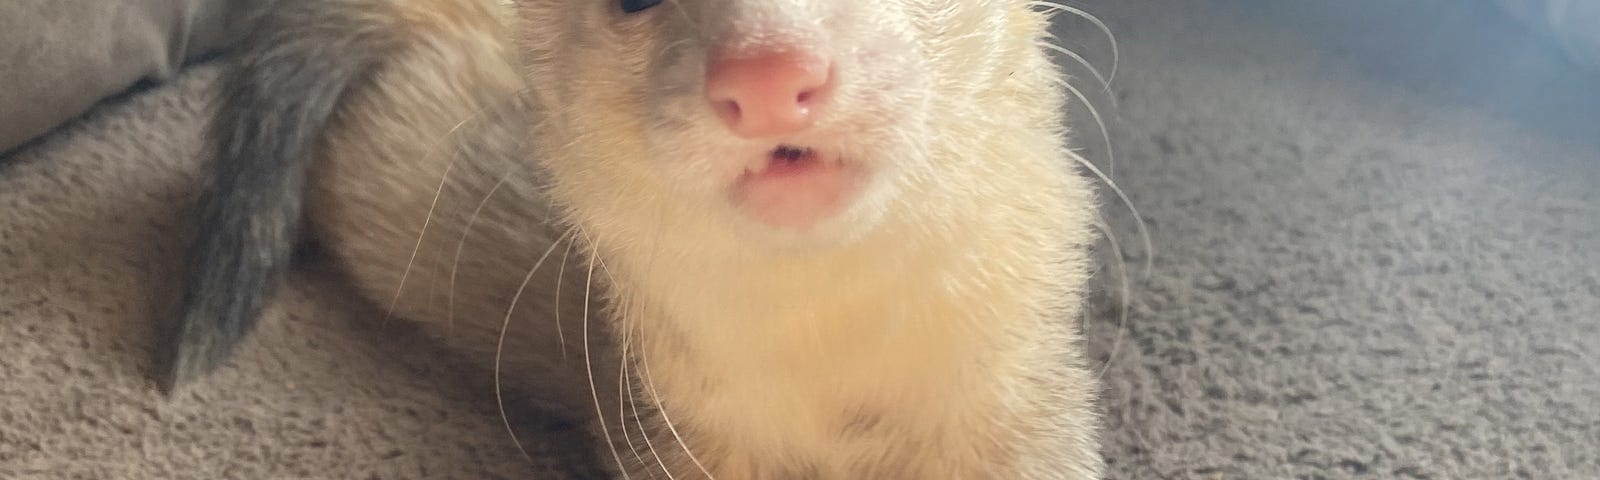 ferret looks at camera with mouth open